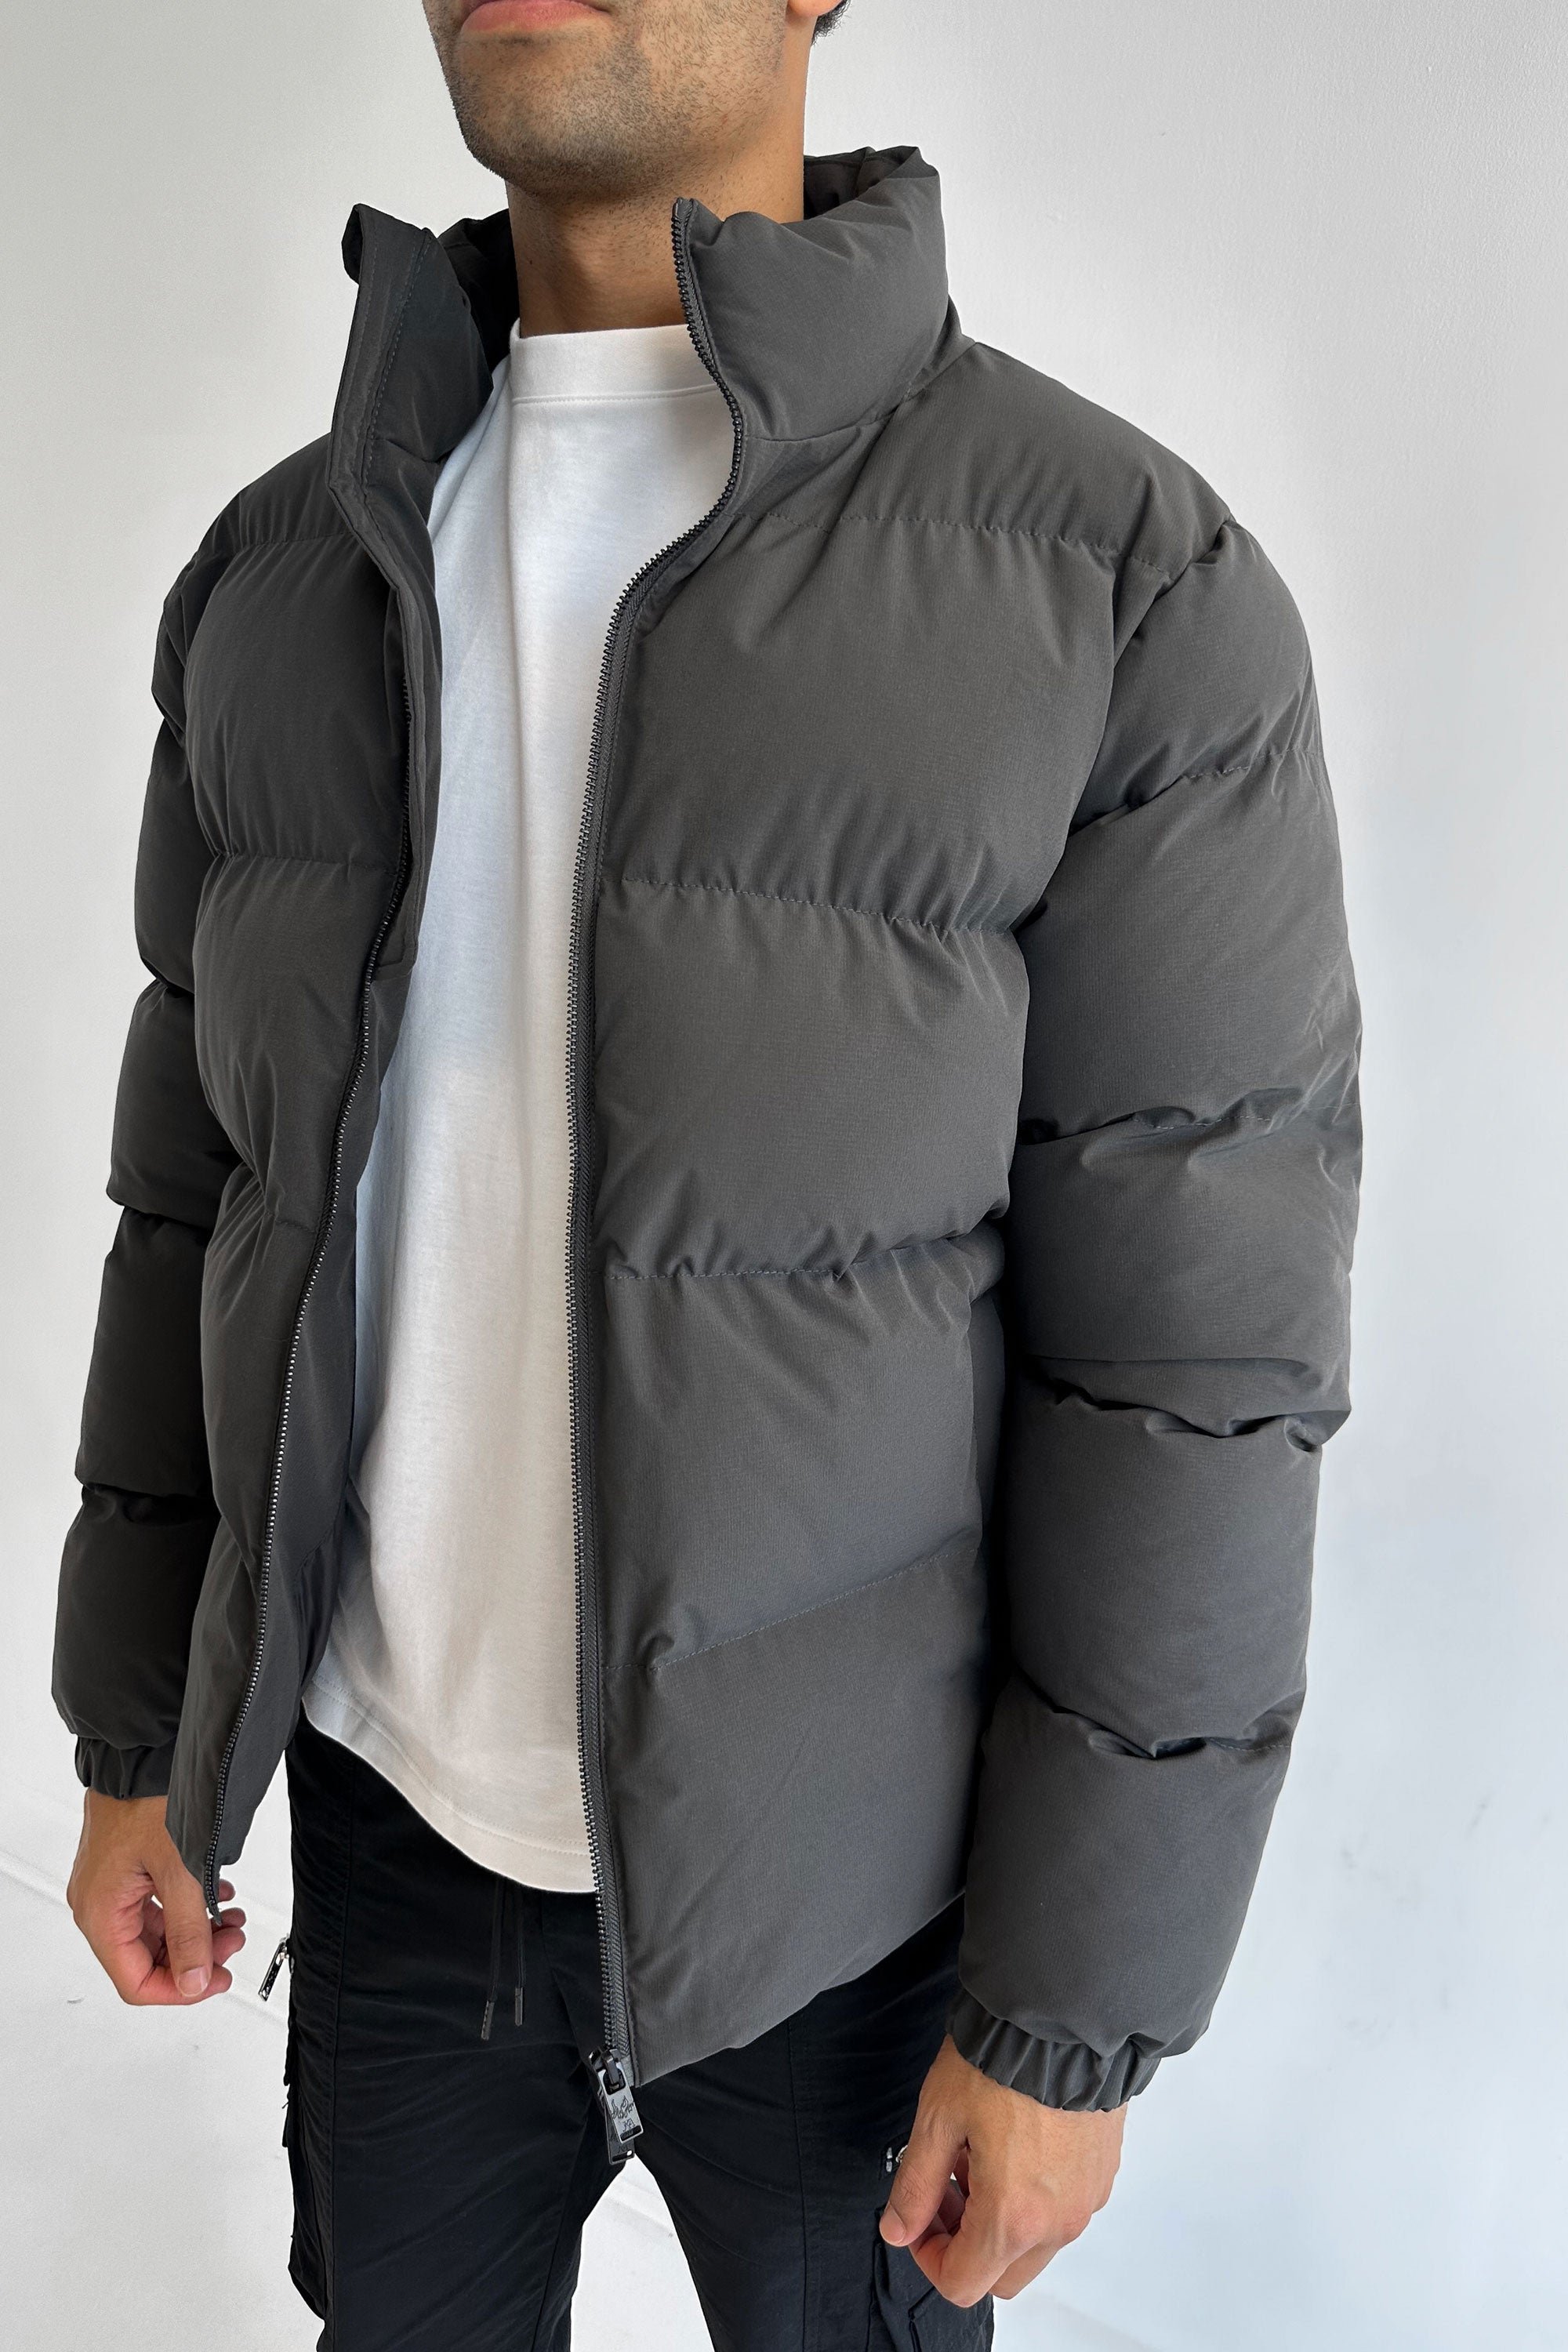 Day To Day V2 Jacket - Charcoal